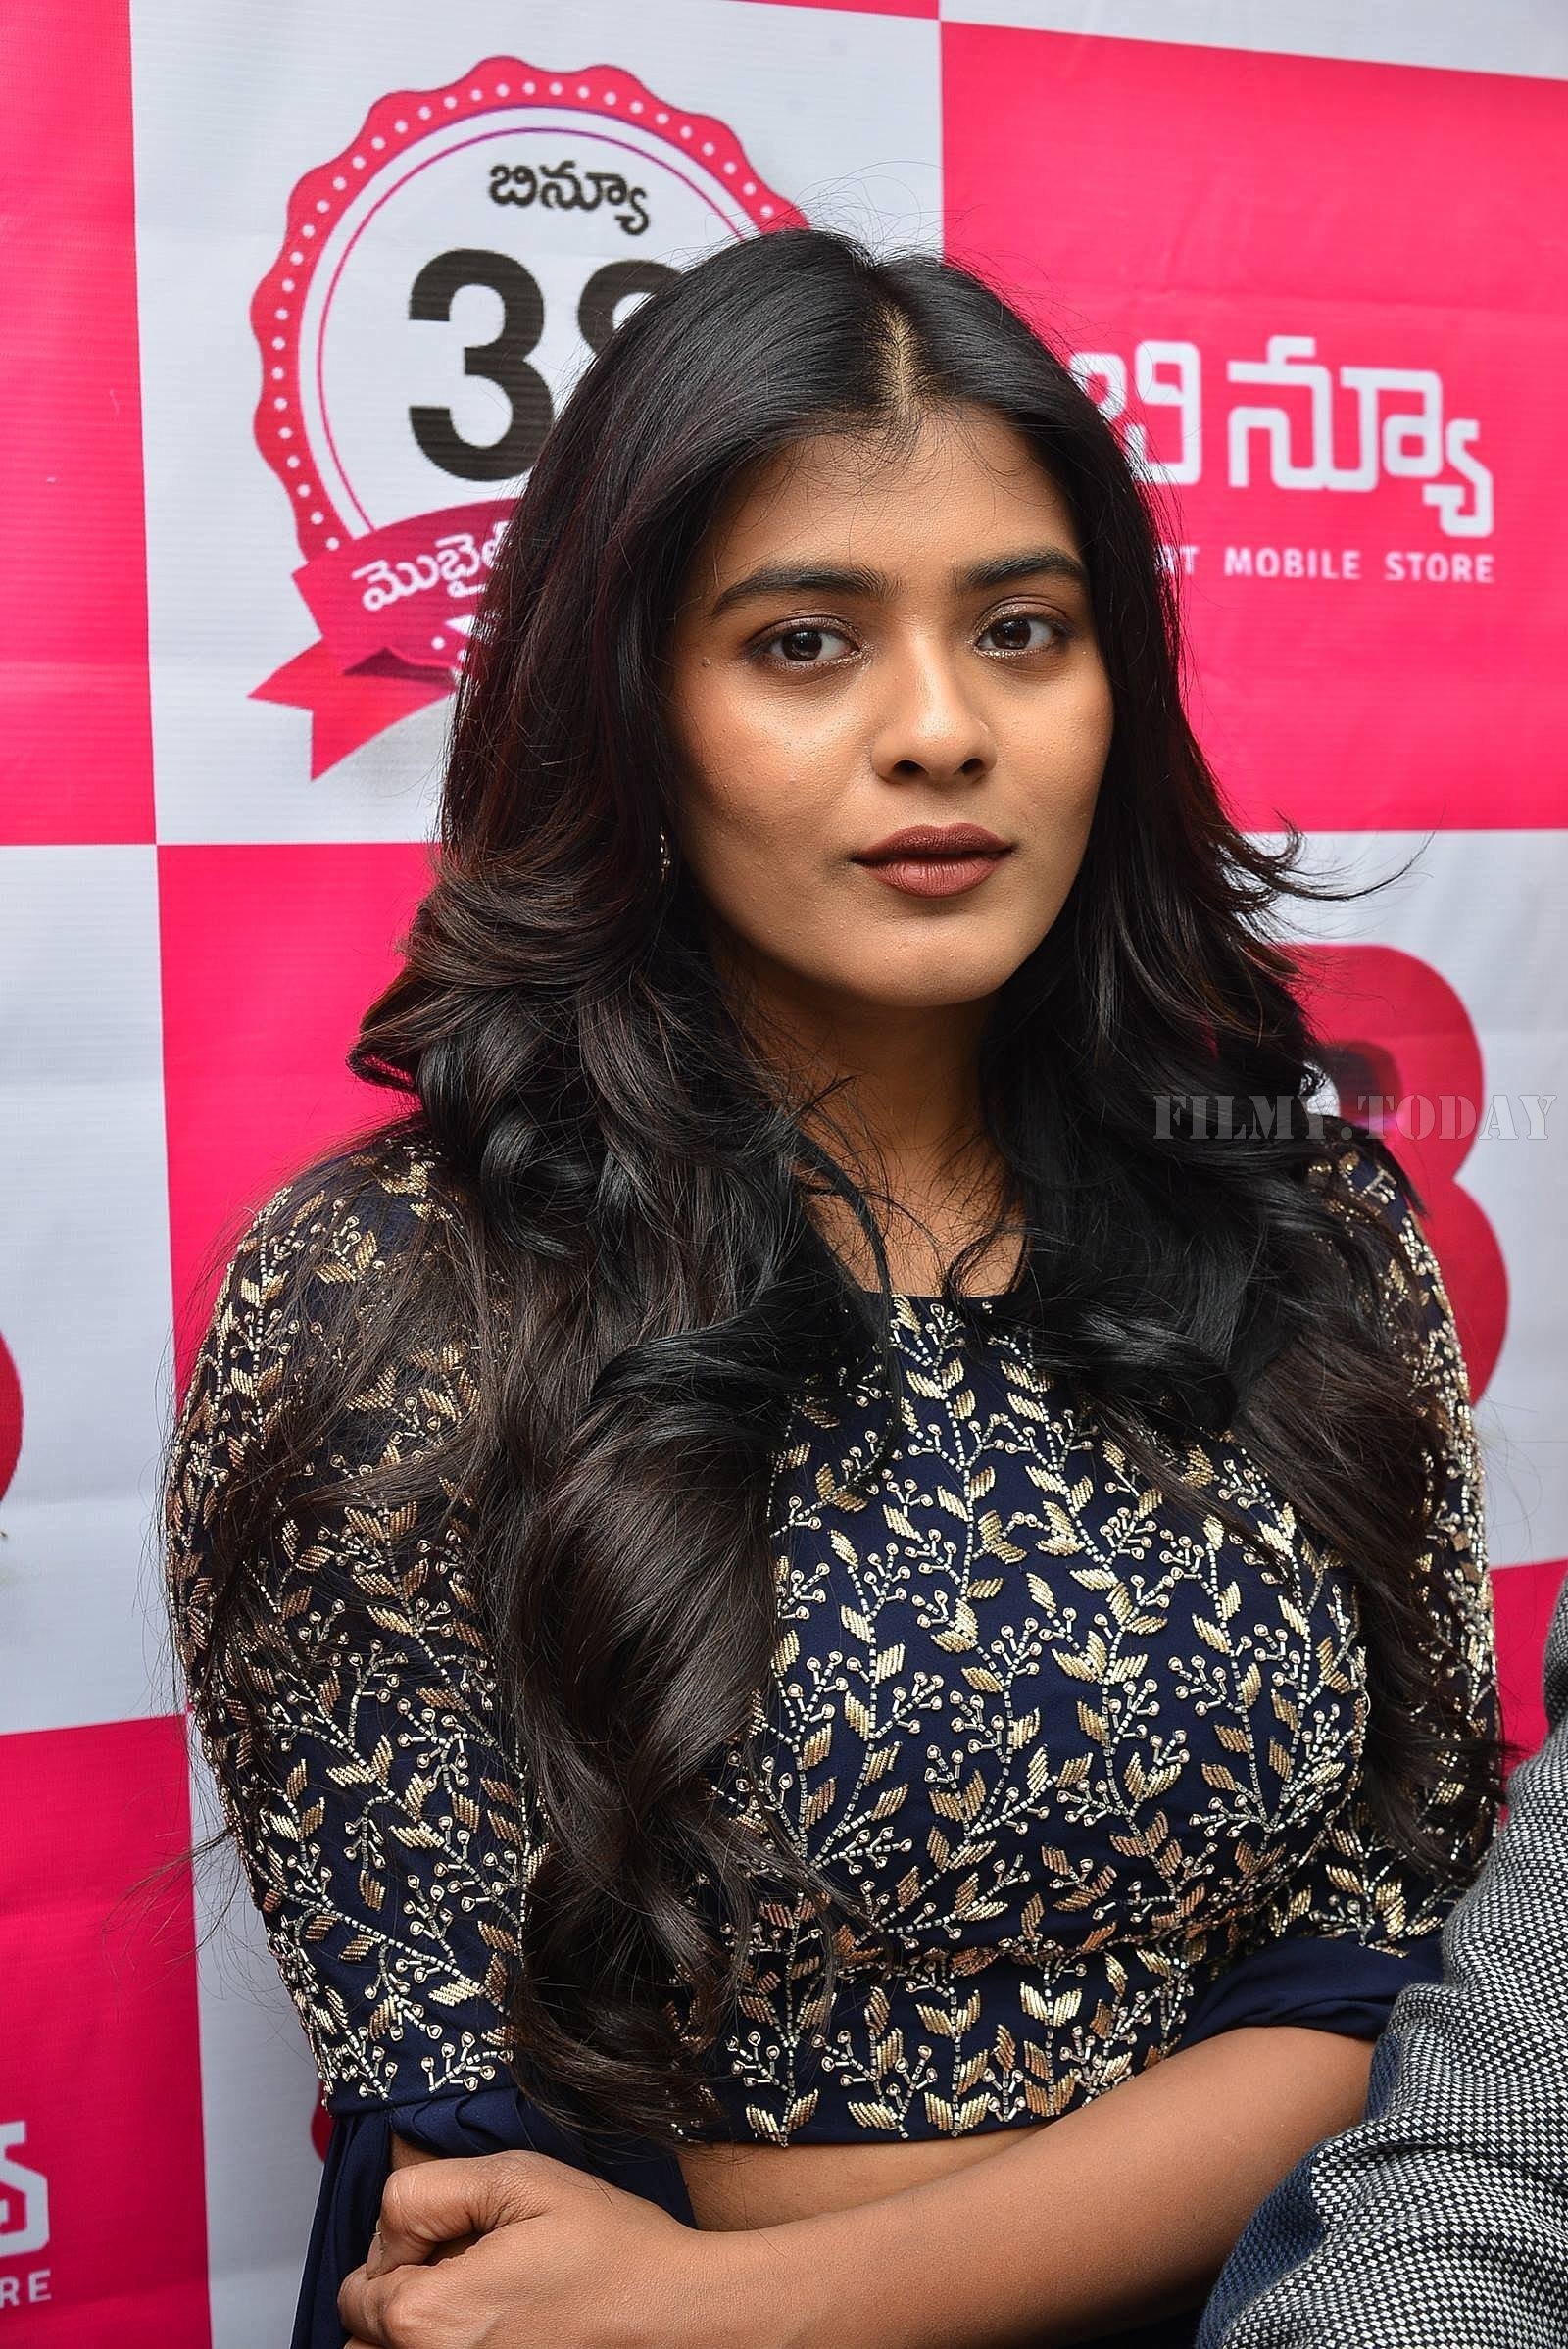 Actress Hebah Patel launches B New Mobile Store at Chirala Photos | Picture 1556566